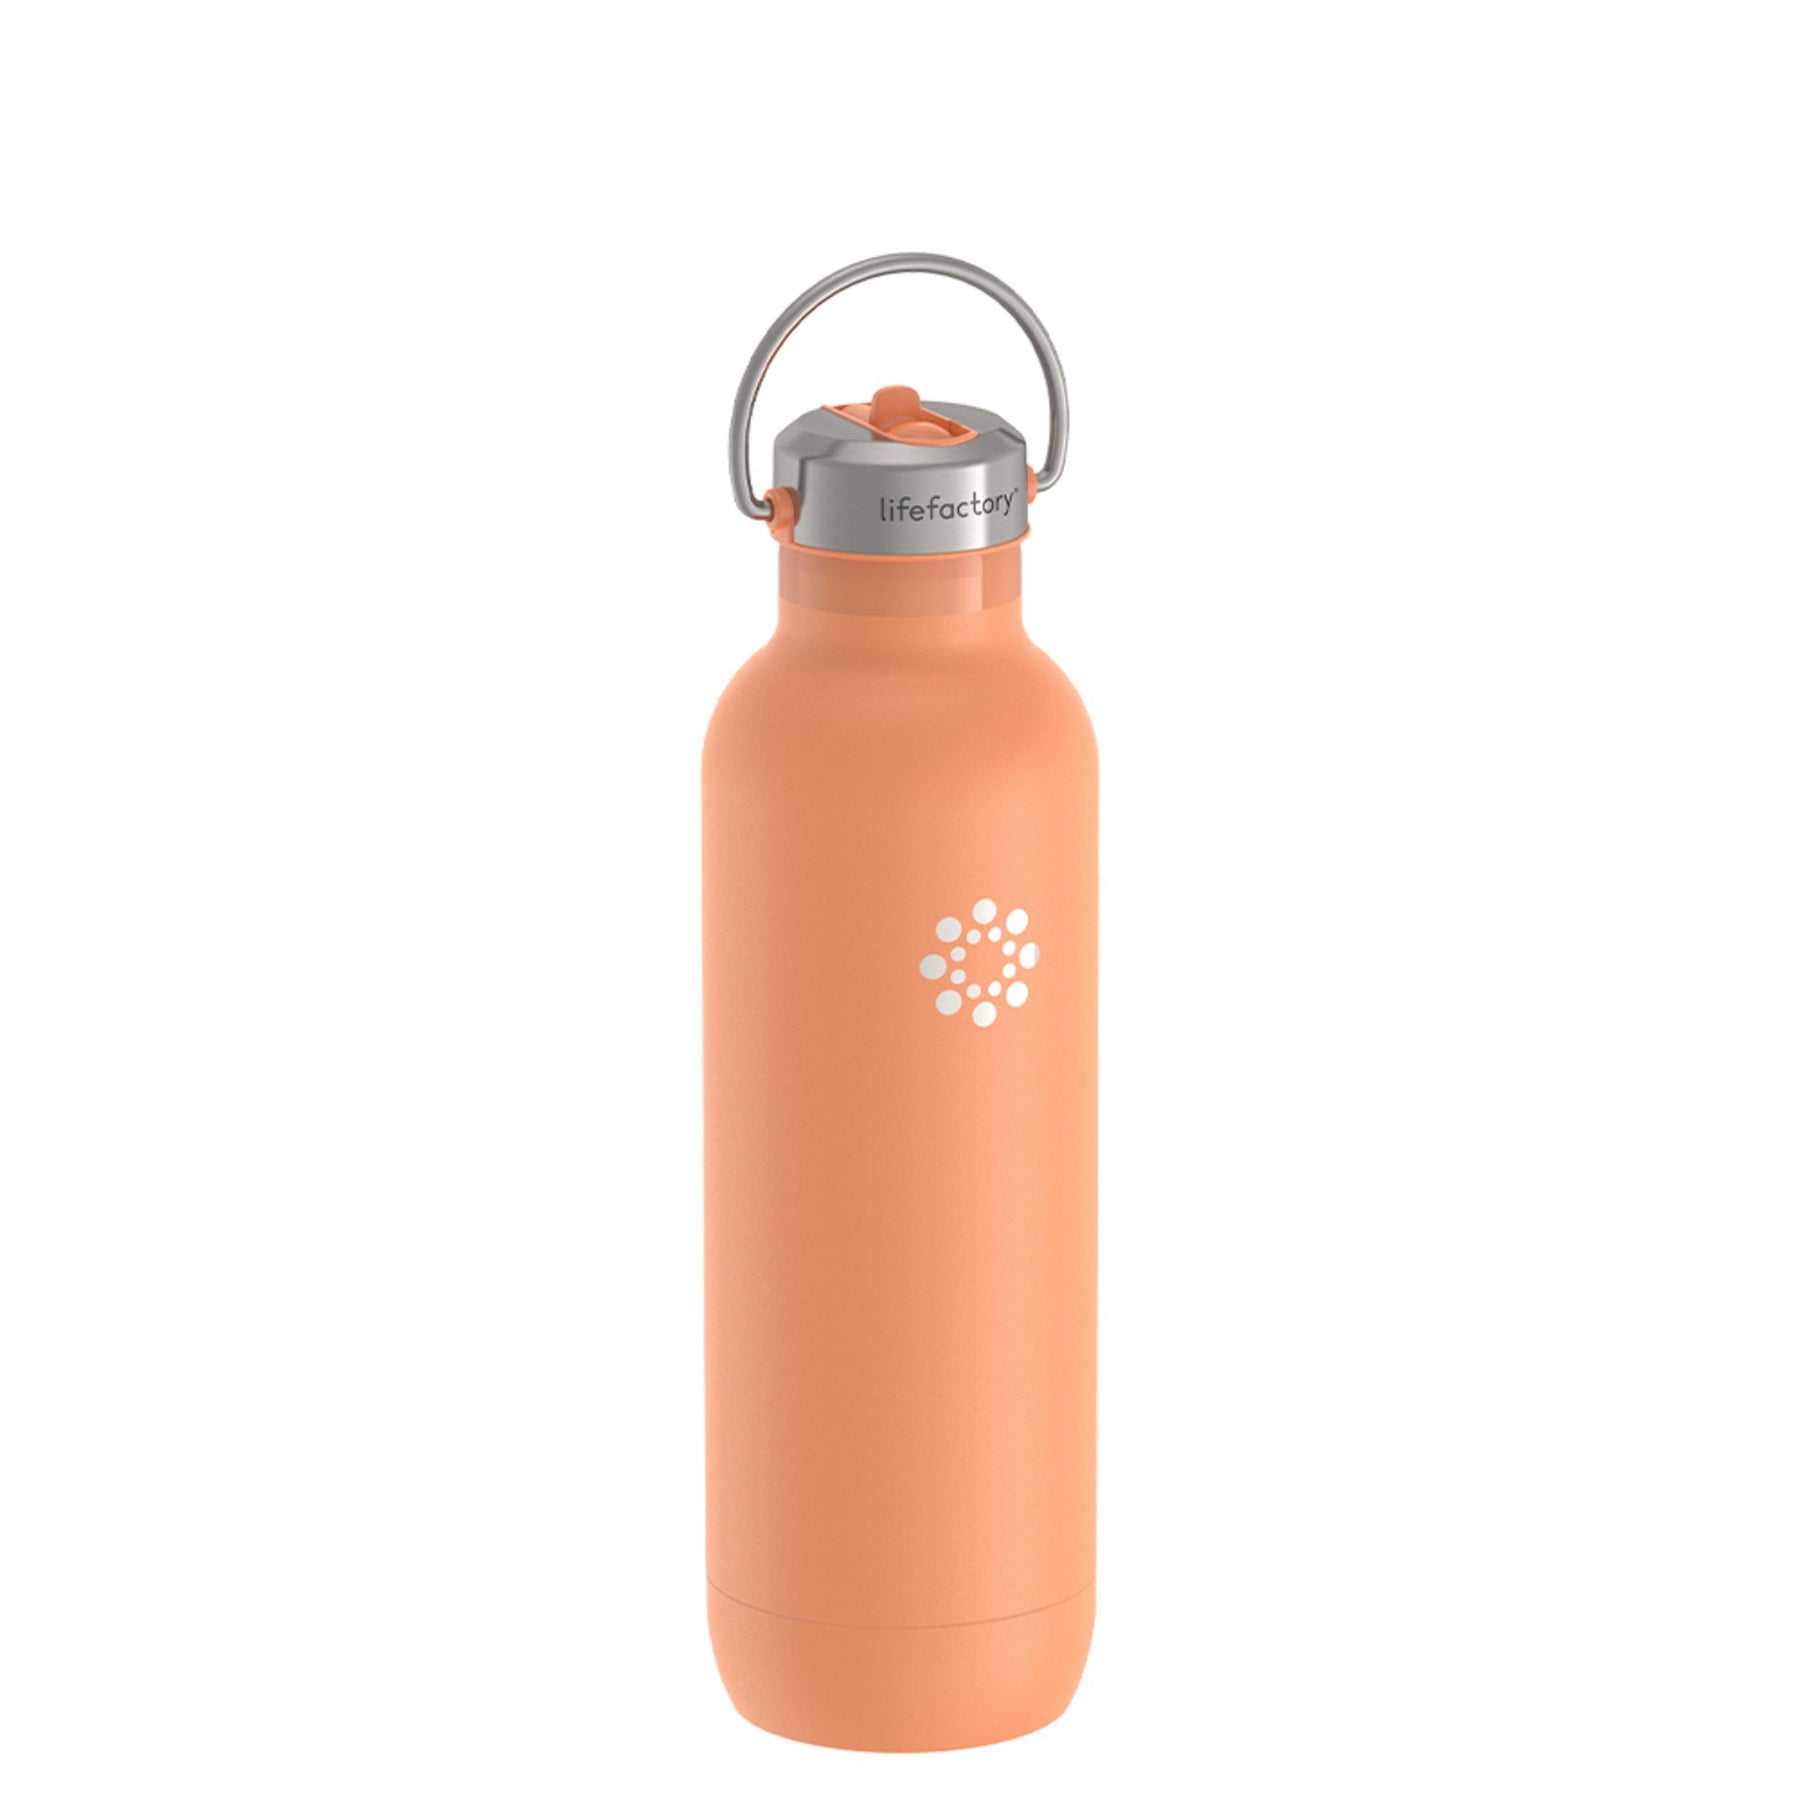 24 oz Insulated Water Bottle With Straw Lid & Spout Lid,Reusable